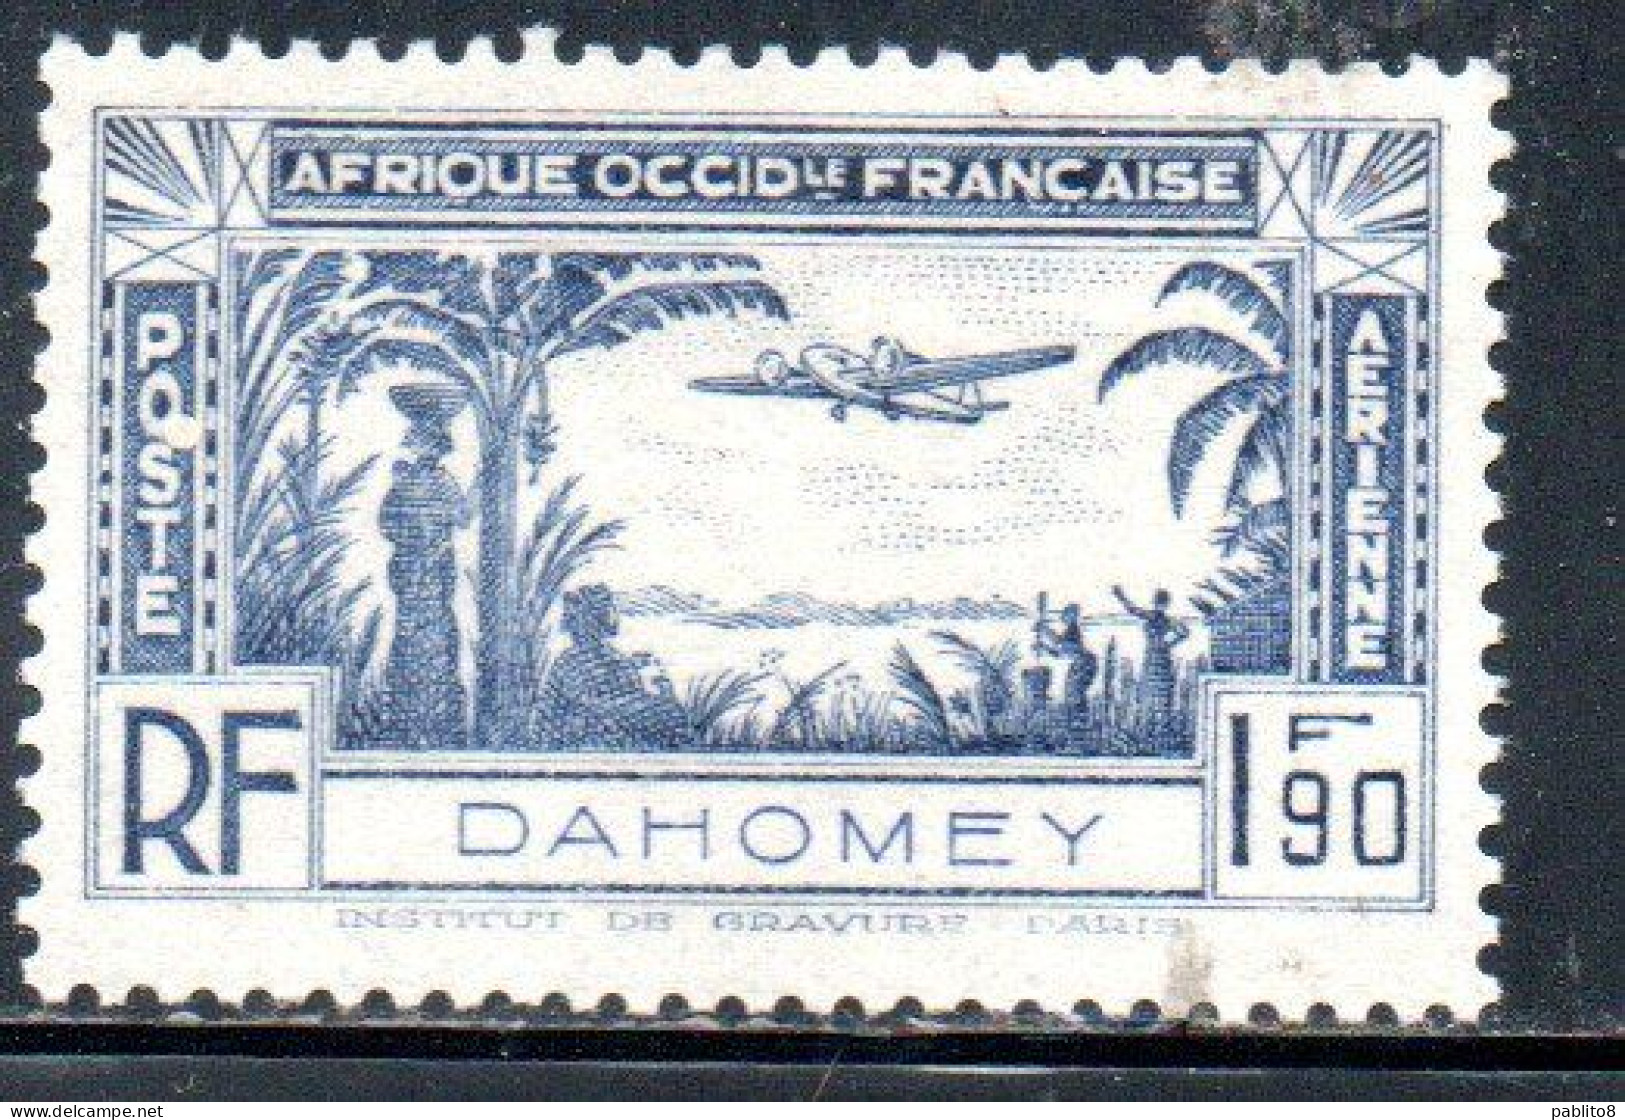 DAHOMEY 1940 AIR POST MAIL POSTE AERIENNE AIRMAIL PLANE 1.90fr MH - Unused Stamps